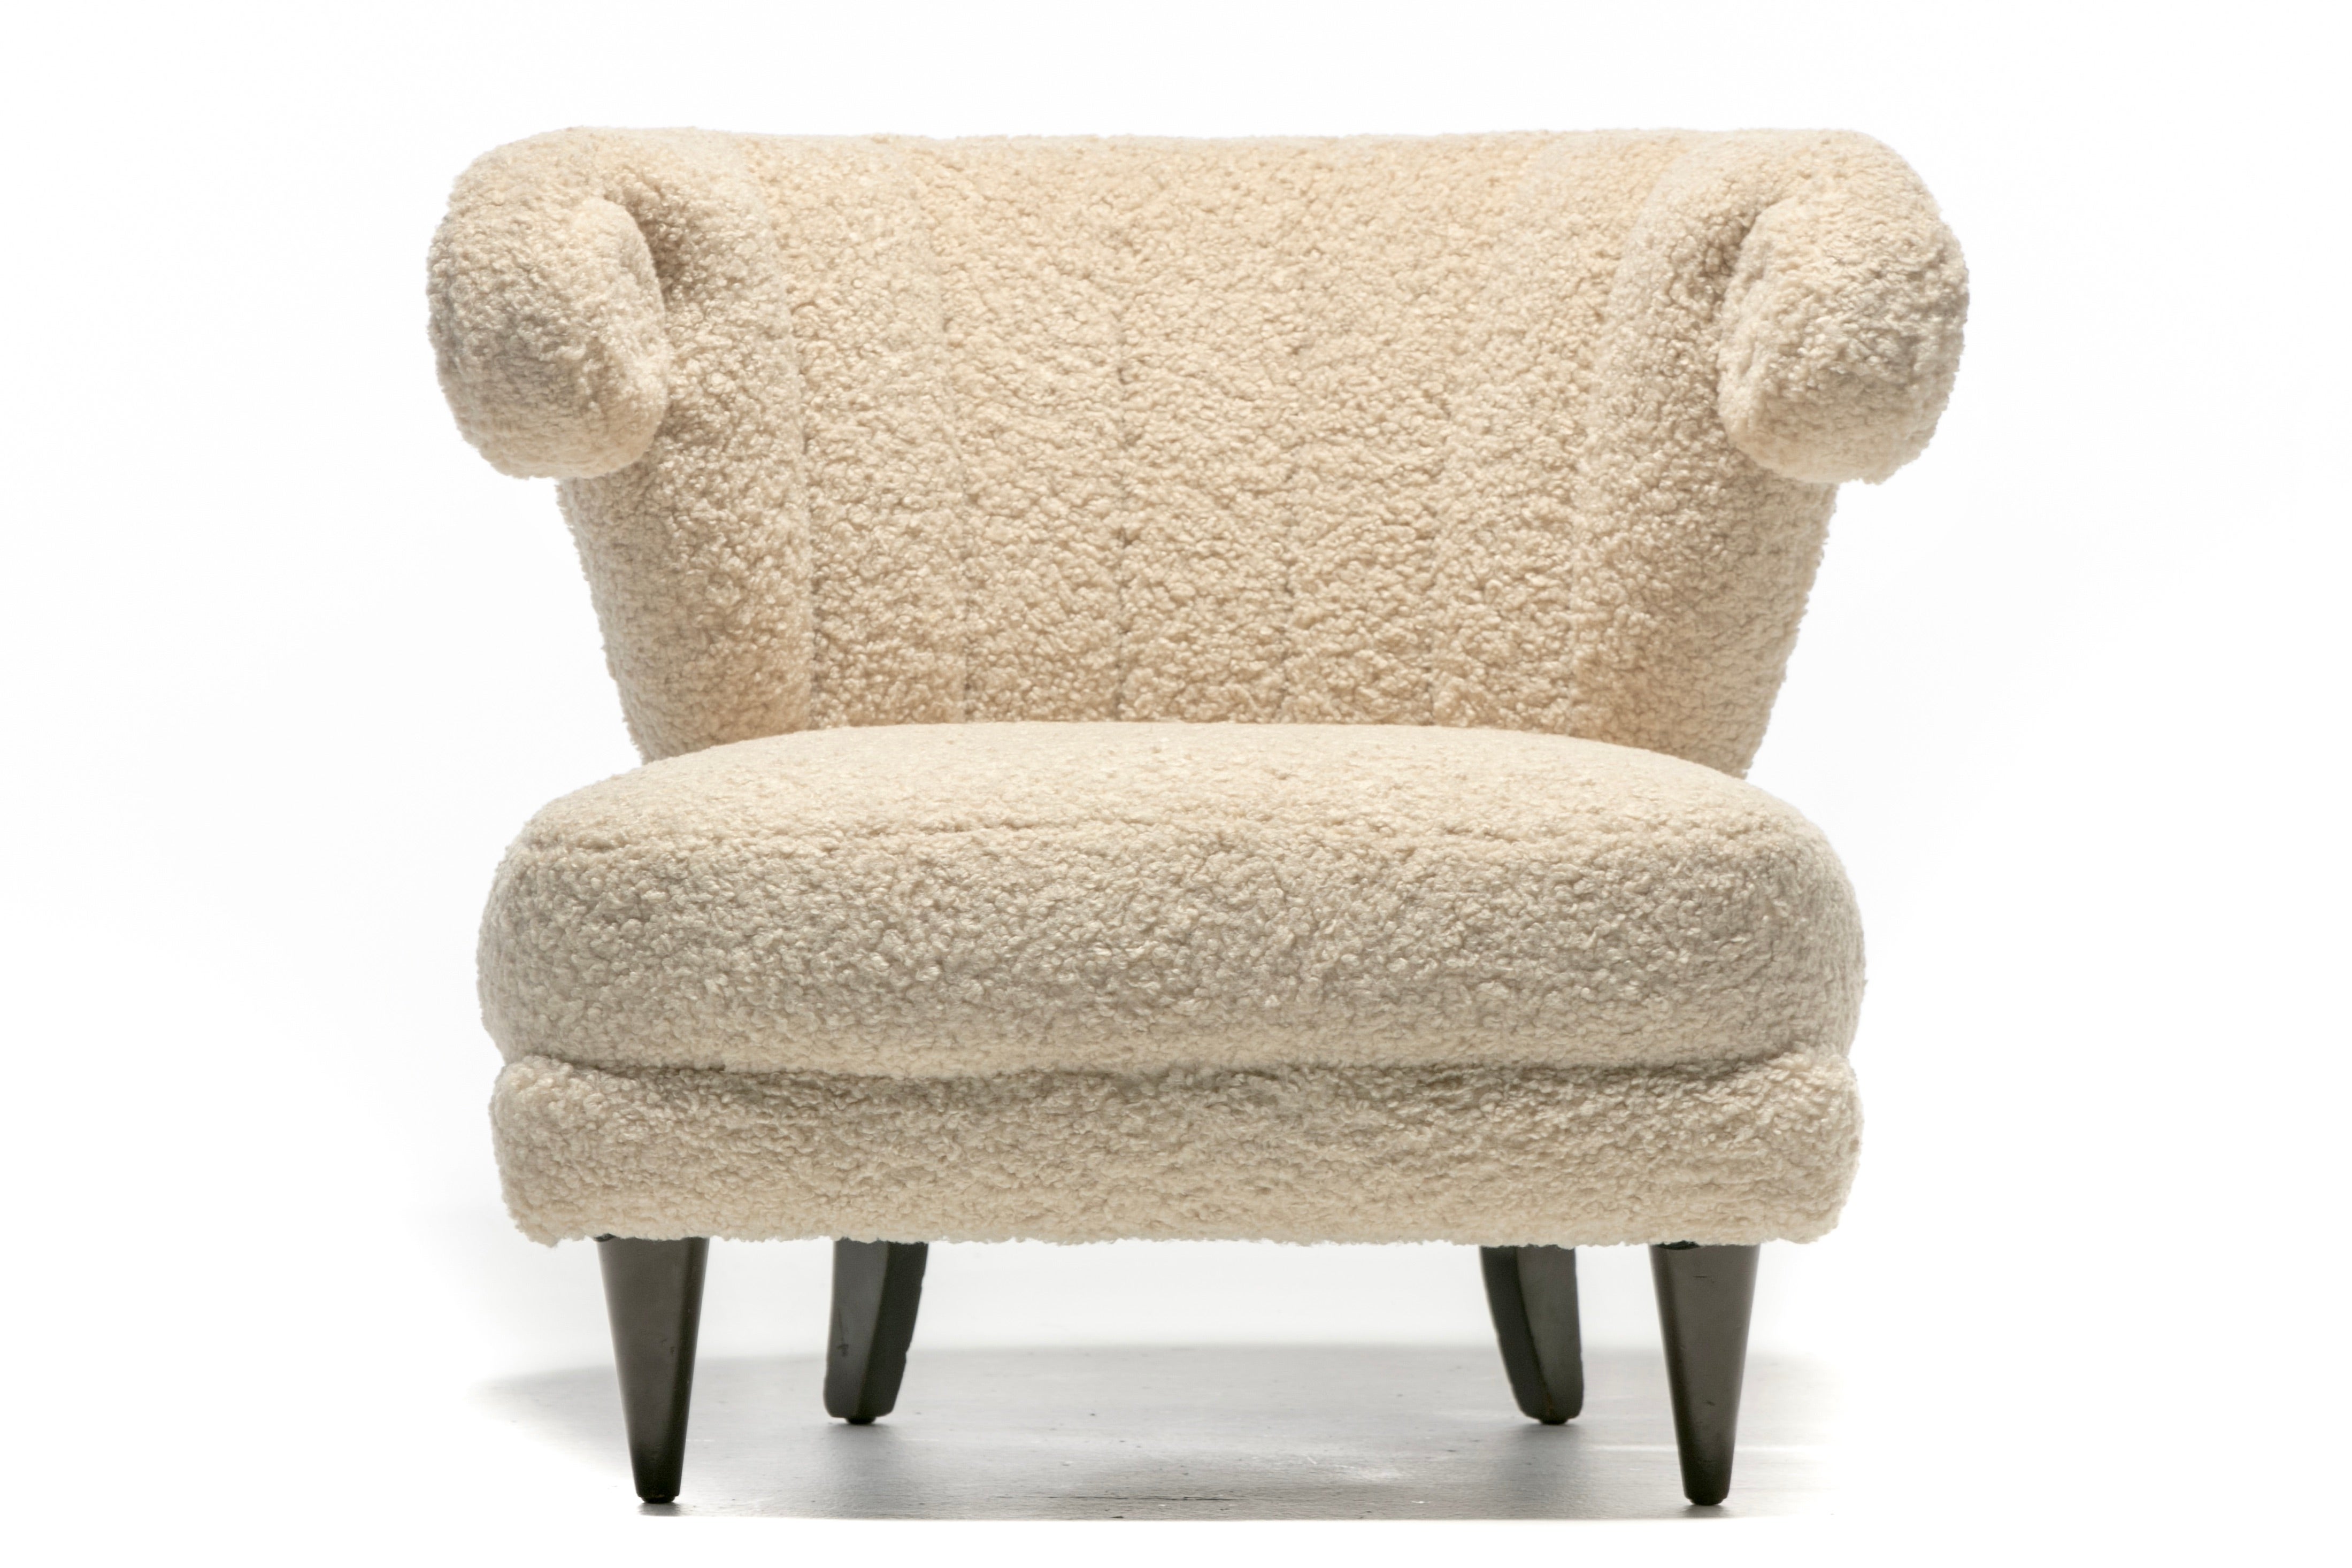 Paul Laszlo 1940s slipper chair with new super soft off white ivory bouclé upholstery. Hollywood Regency from top to bottom and side to side, this gorgeous one of a kind chair brings together lots of sexy details perfectly to create THE slipper